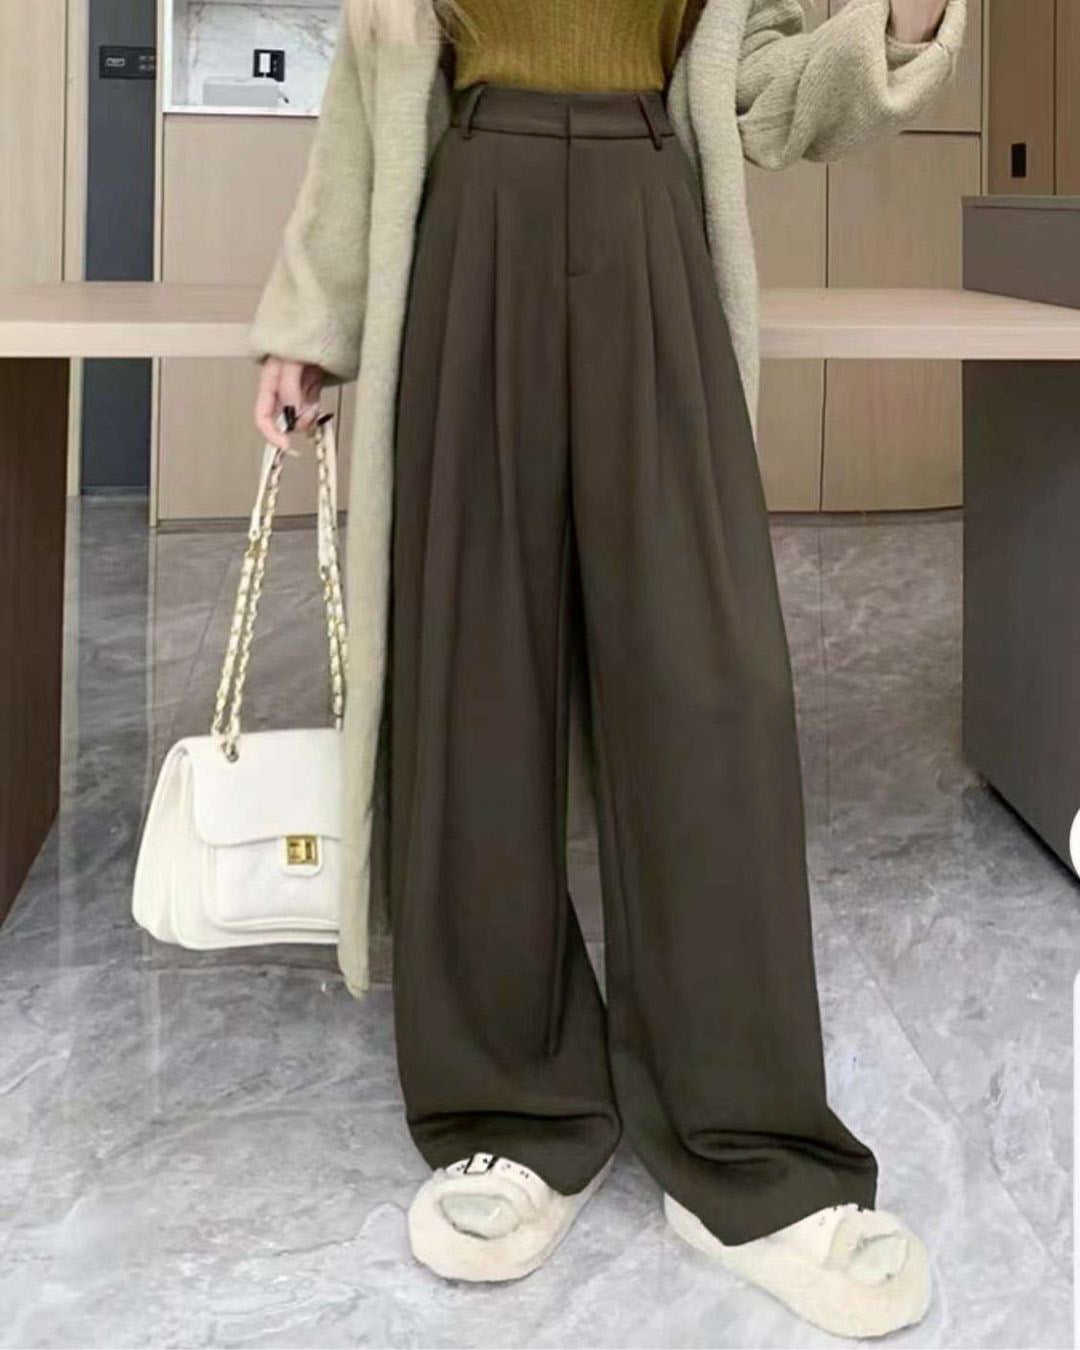 PLEATED STRAIGHT PANTS,bottomwear, full length, high rise, olive green, pants, pleated, polyester, relaxed fit, semi-formal, streetwear, summer, wide leg, woven,pleated_straight_pants_olivegreen,Color- Olive GreenFabric- Polyester Type- Wide LegFit- Straight Fit Length- Full Length(41in)Waist- High RiseClosure- Zip &amp; ButtonNo. of Pockets- 2Print- SolidDetail- Pleated*Available with belt